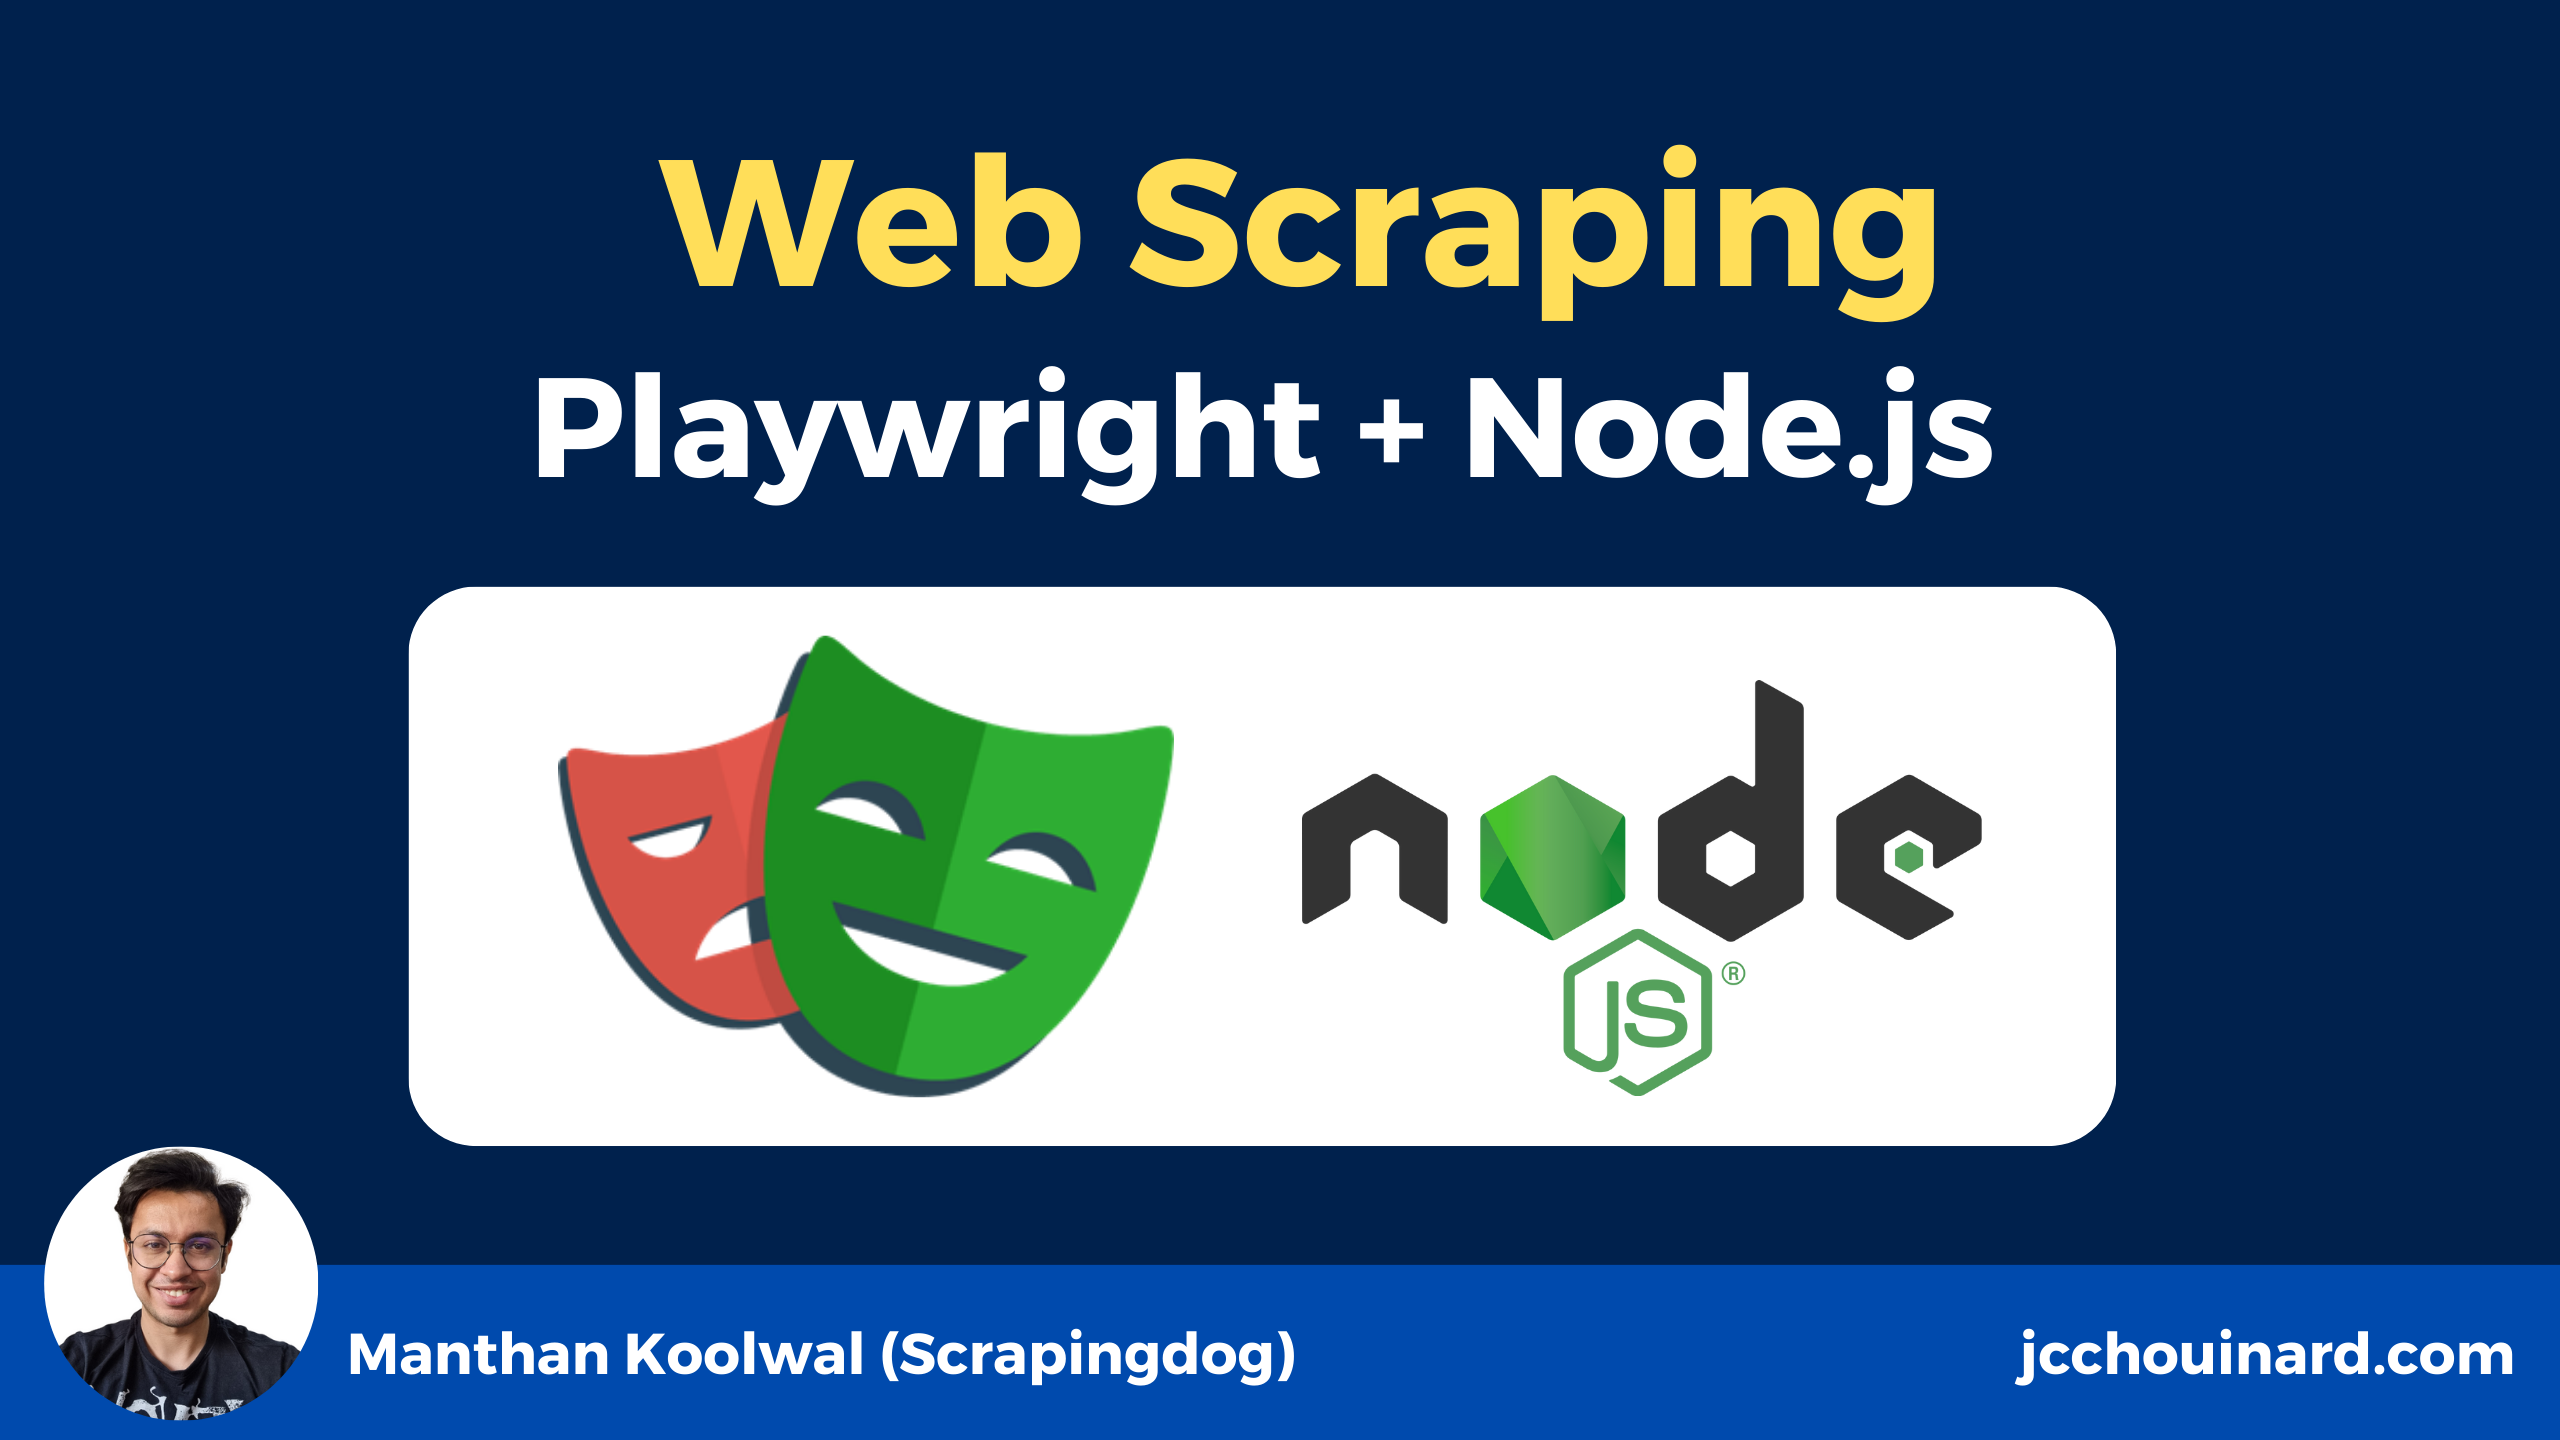 webscraping with playwright and nodejs